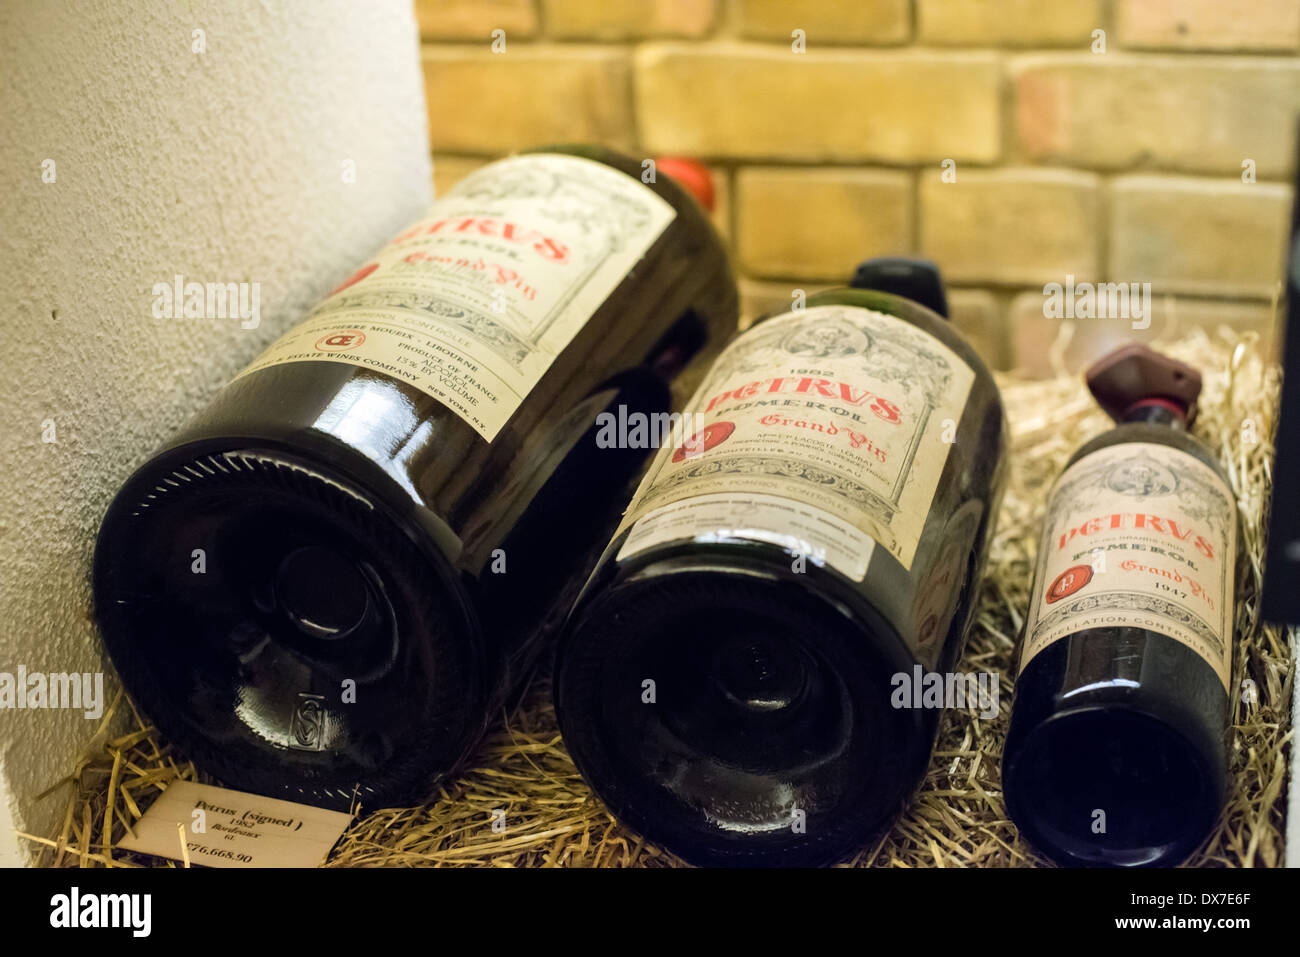 In Imperial of 1982 Petrus, a Jeroboam of 1982 Petrus and a bottle of 1947 Petrus shot at Hedonism Wines, Davies Street, London Stock Photo